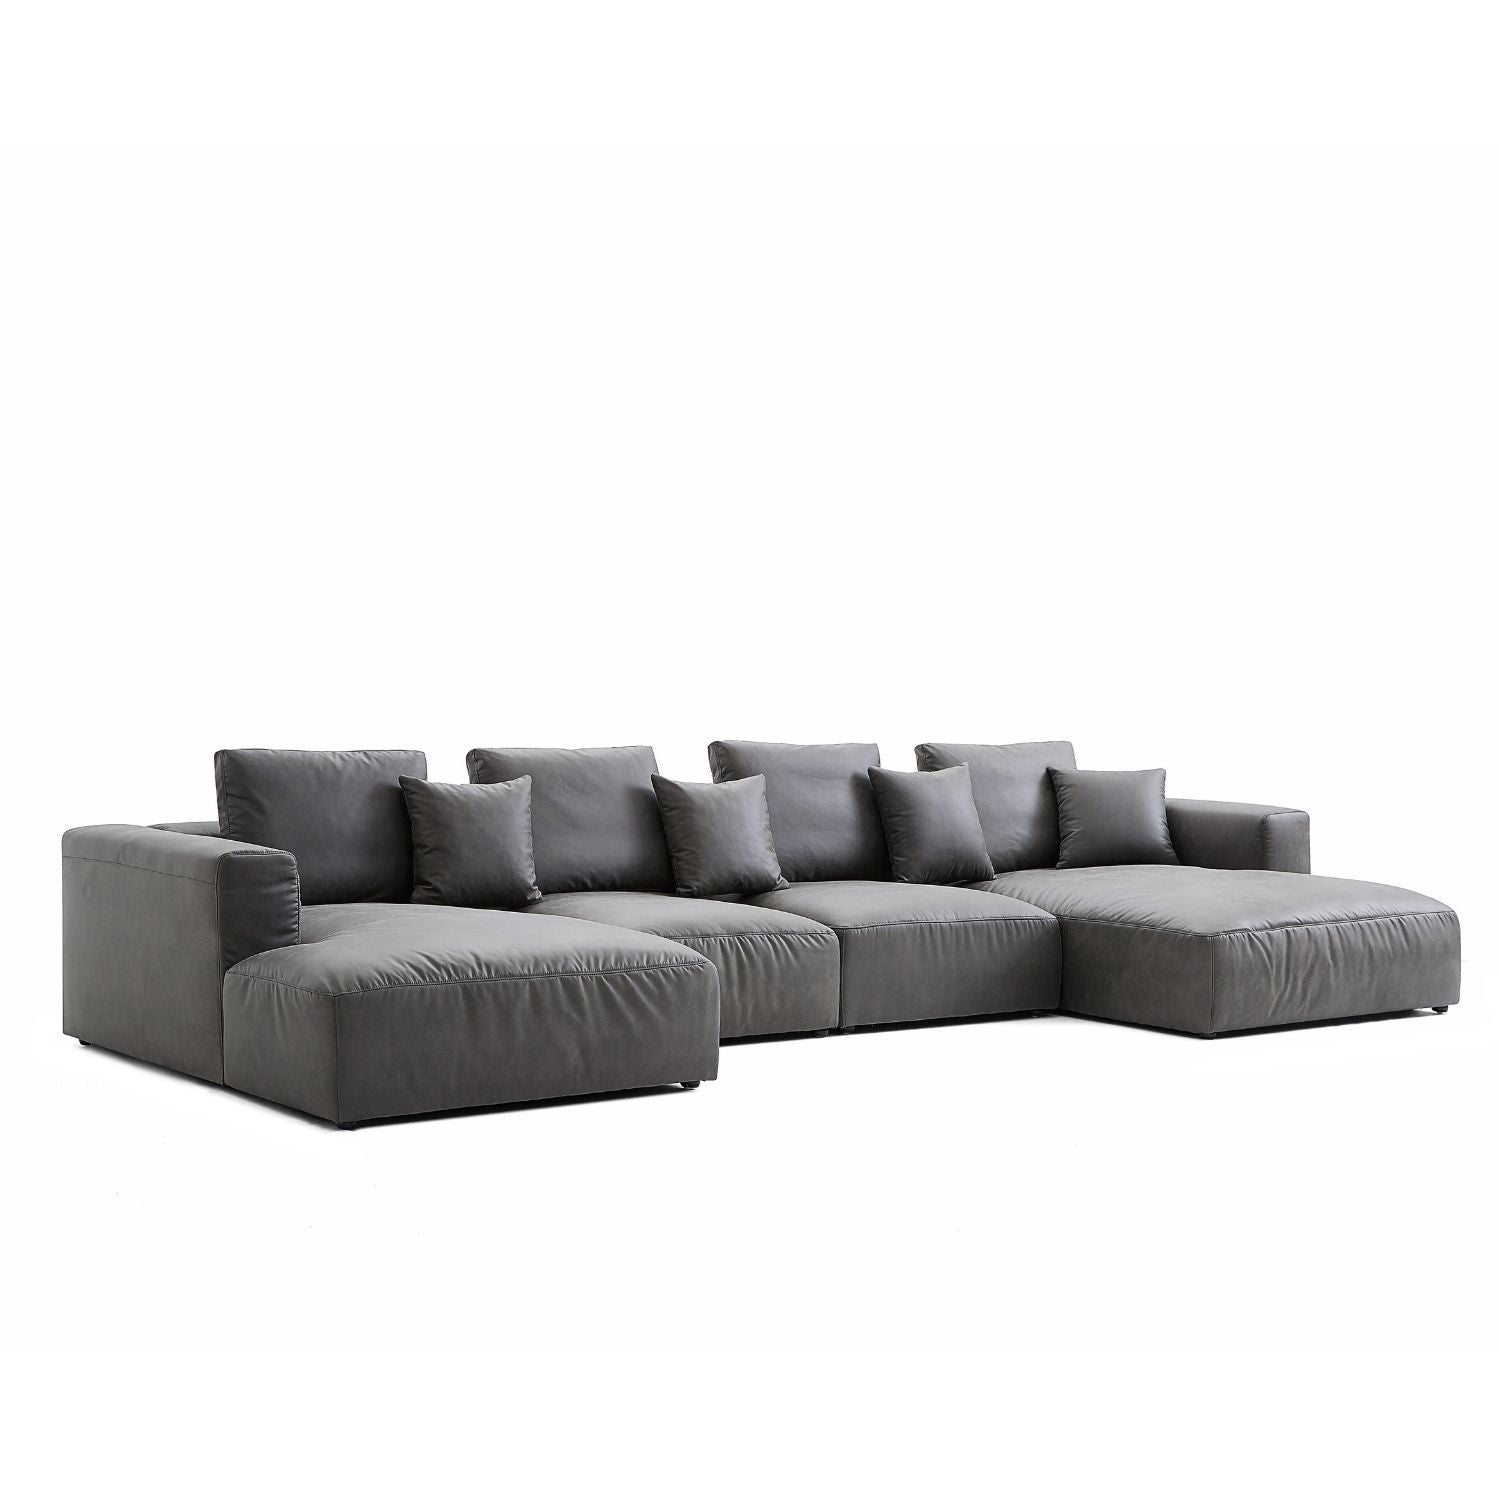 The 5th U sectional Sofa Foundry 